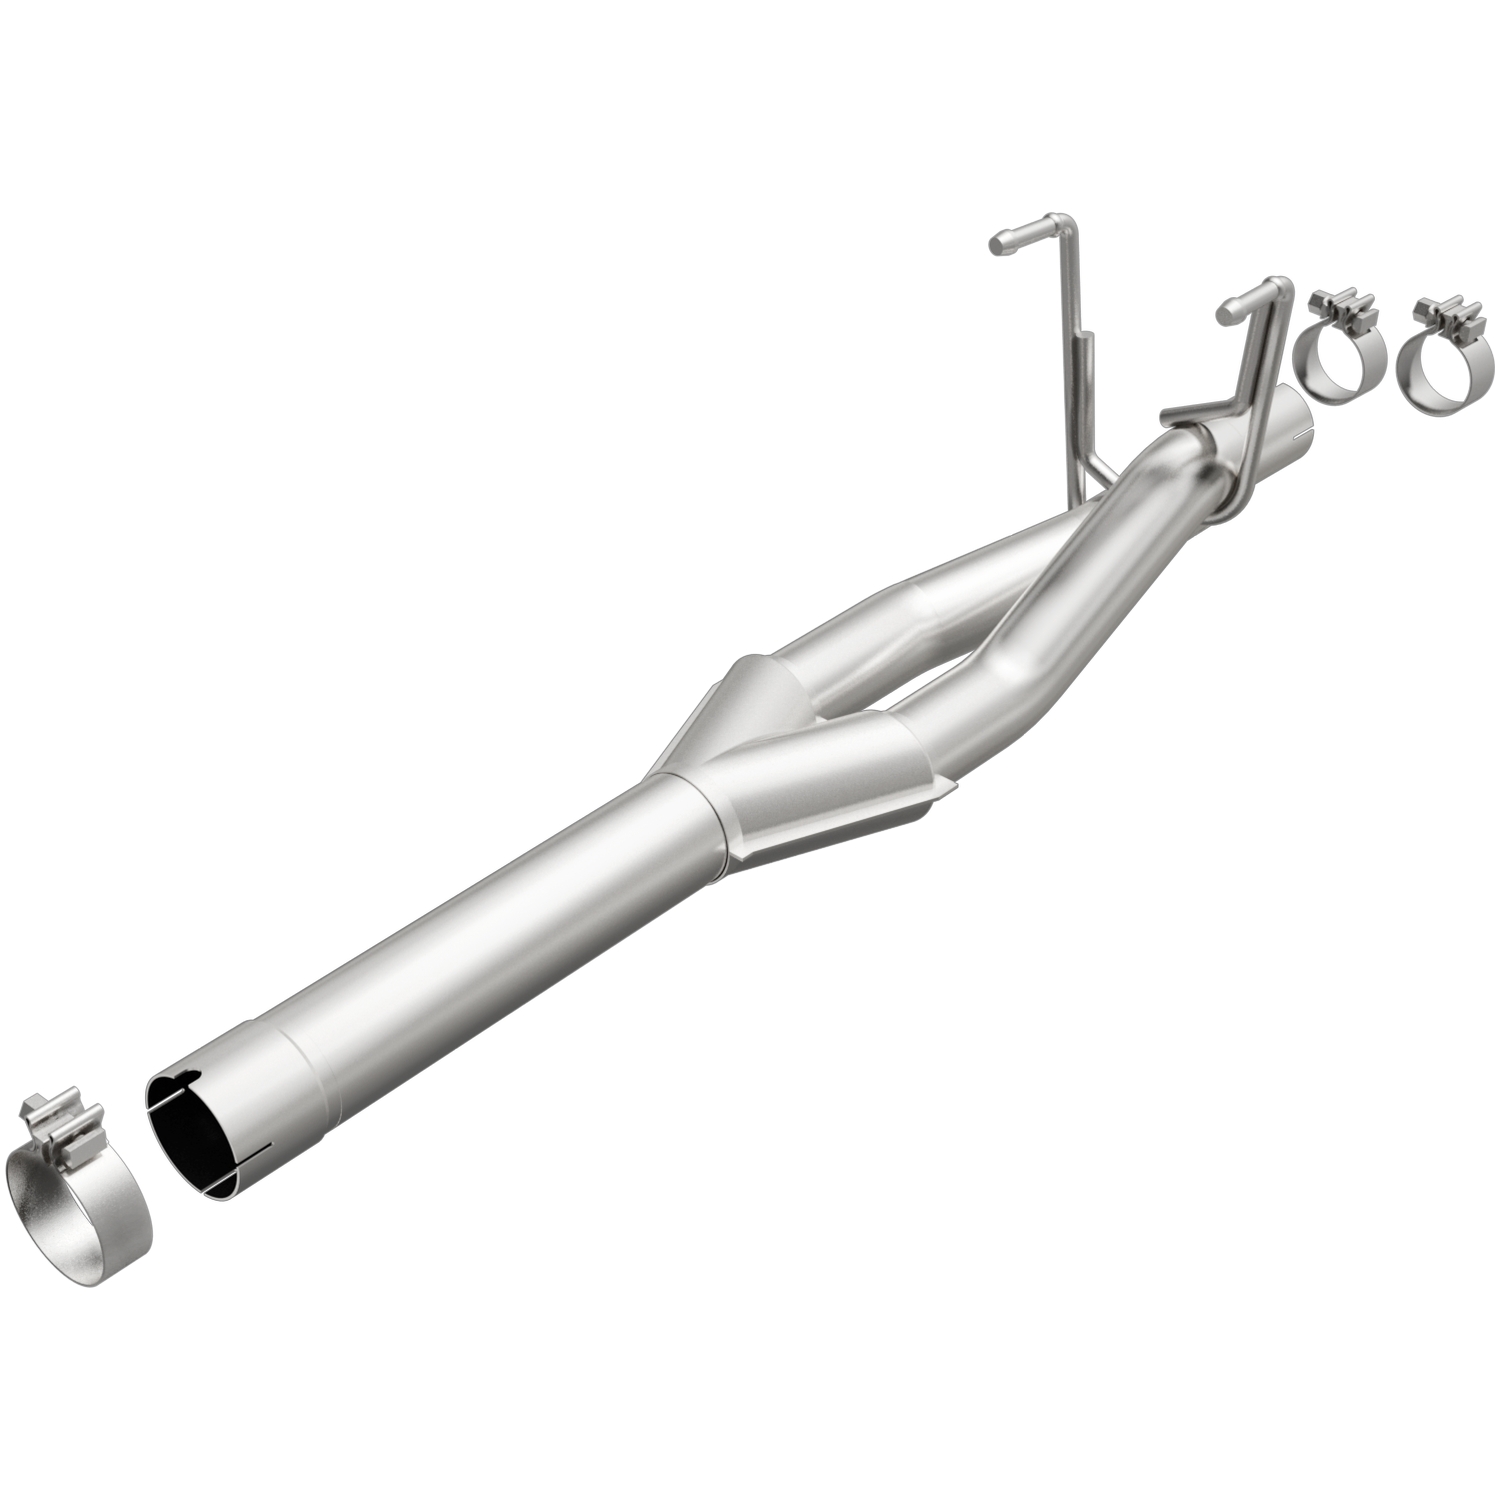 Show details for Magnaflow Direct-Fit Muffler Replacement Kit Without Muffler